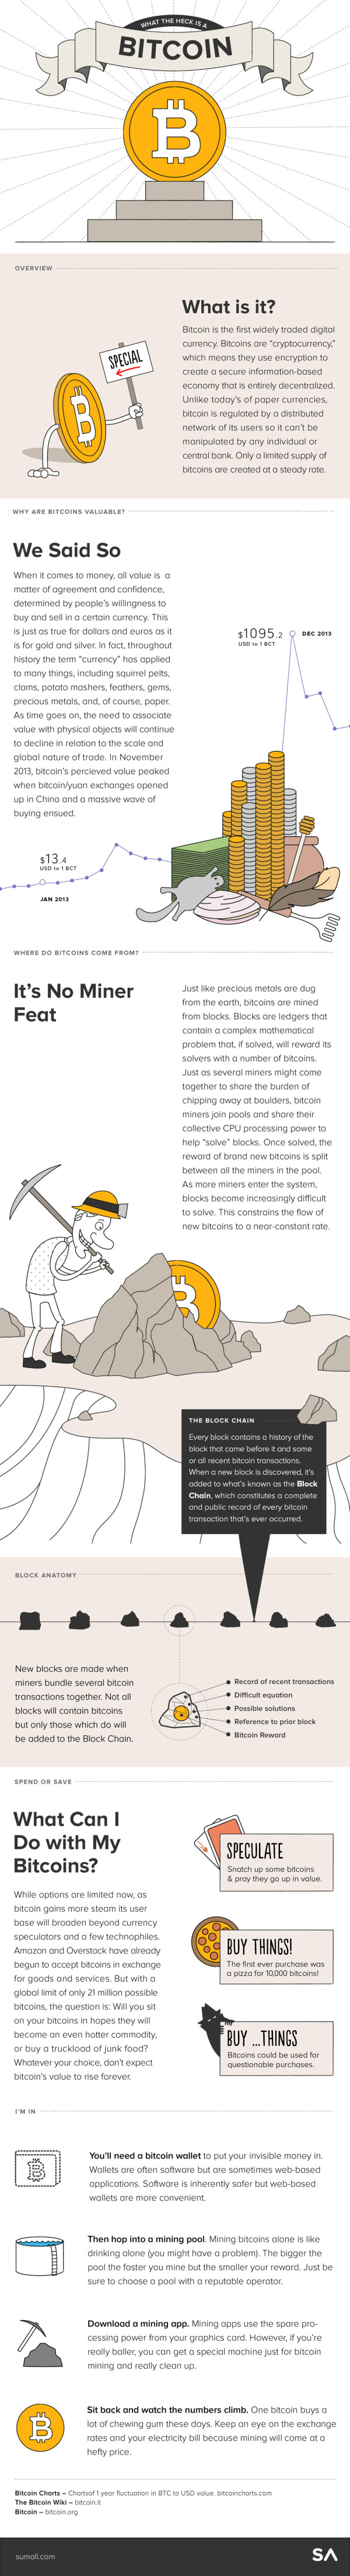 What the Heck is a Bitcoin infographic